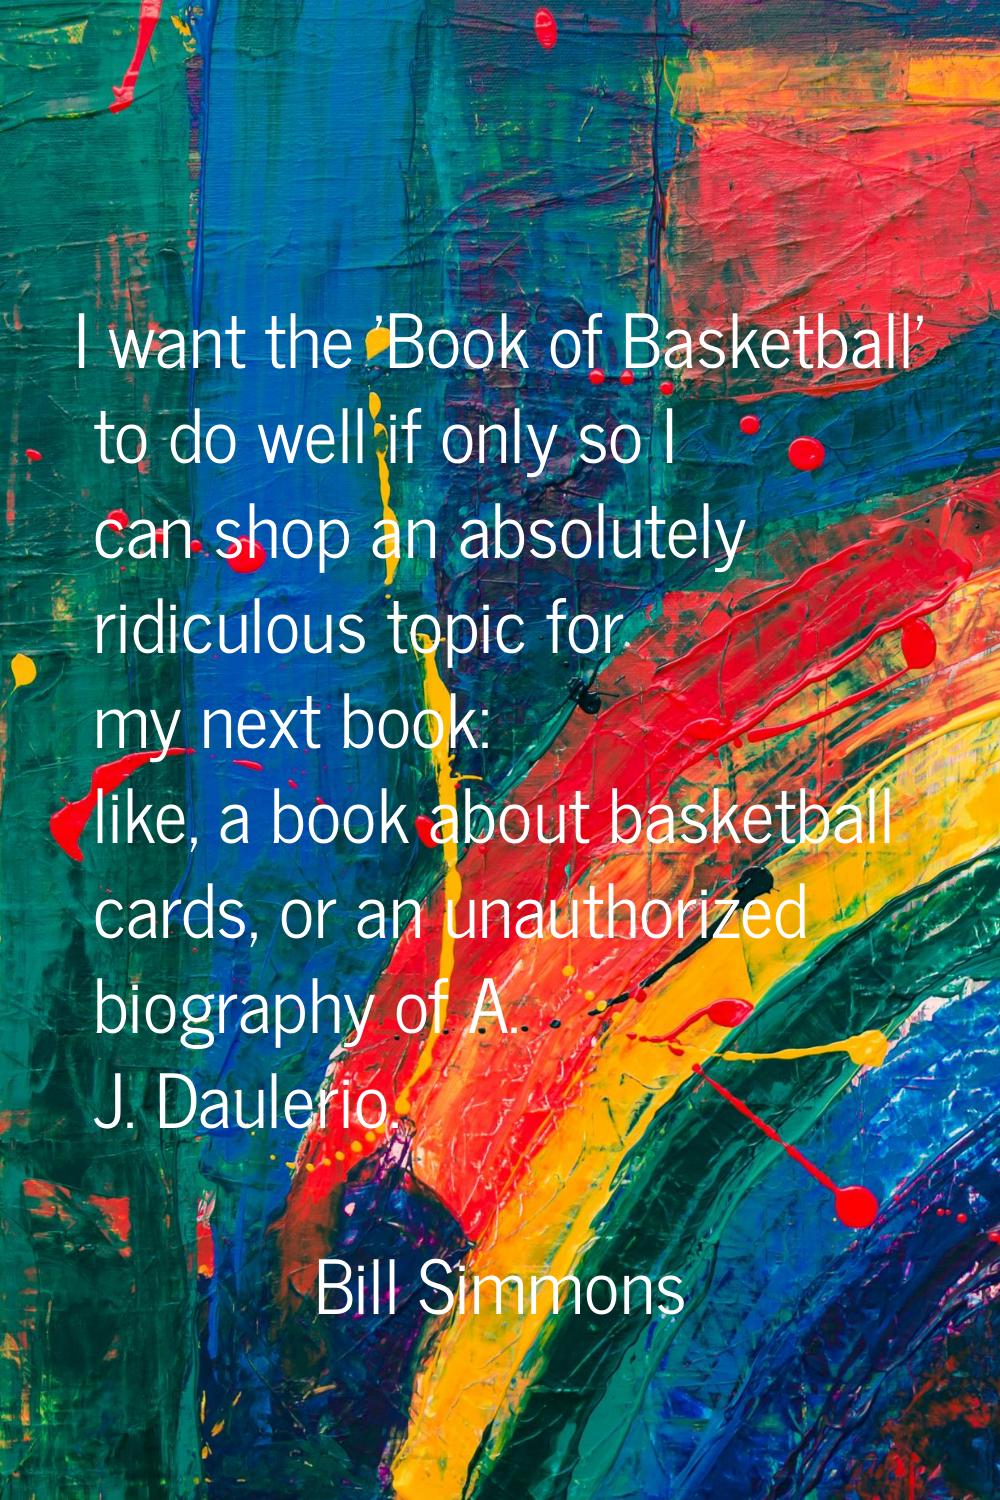 I want the 'Book of Basketball' to do well if only so I can shop an absolutely ridiculous topic for